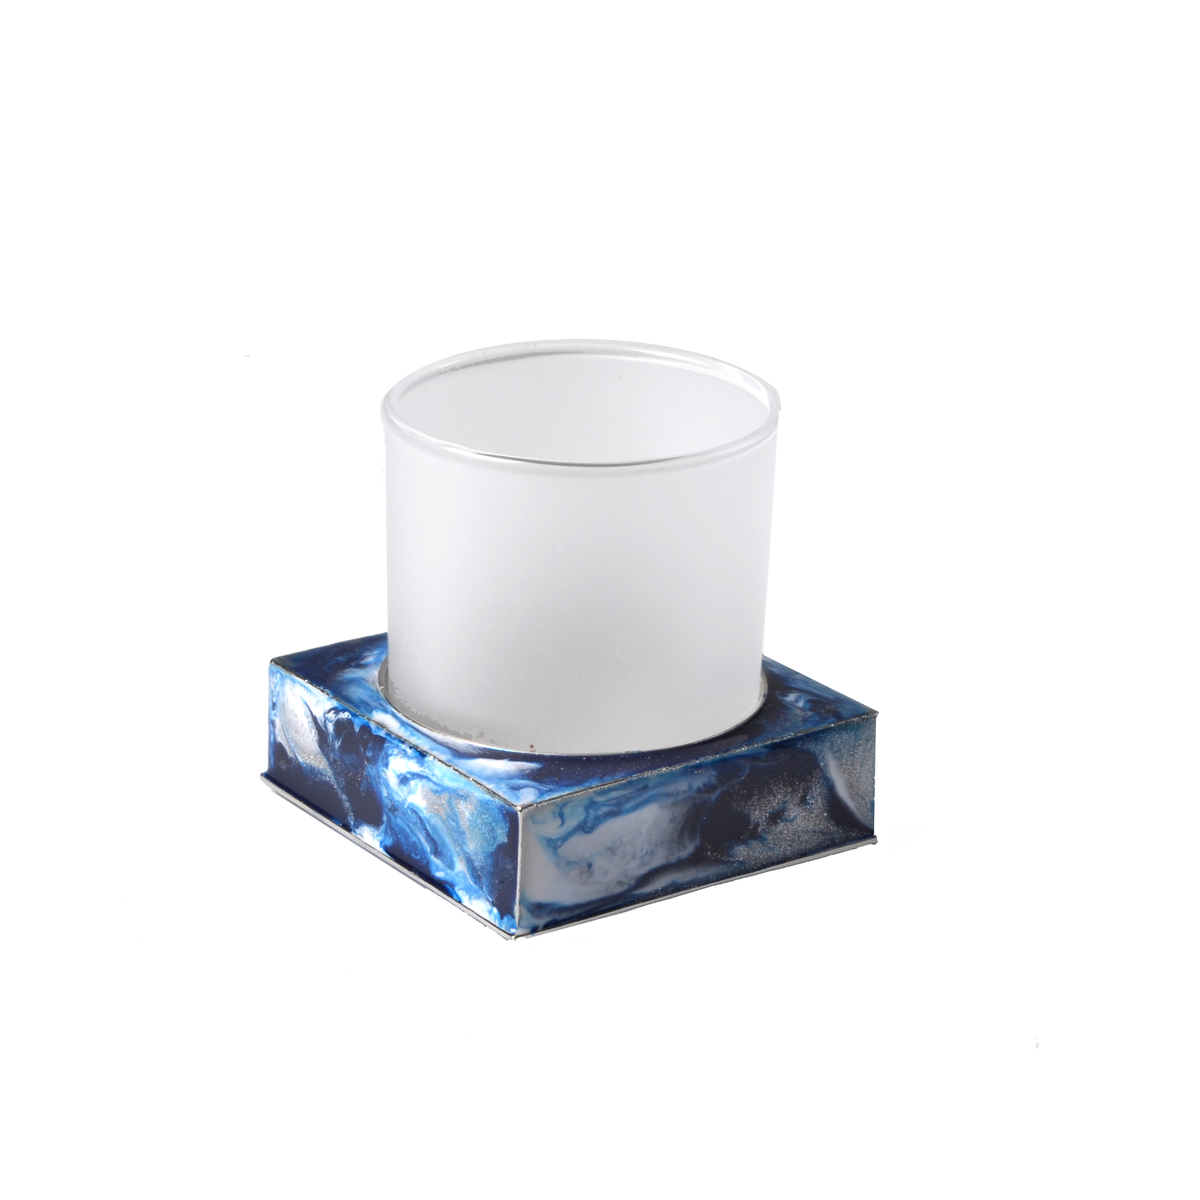 Square Tumbler of Mike and Ally Elan Bath Accessories Collectioin in Blue Medley Silver Color